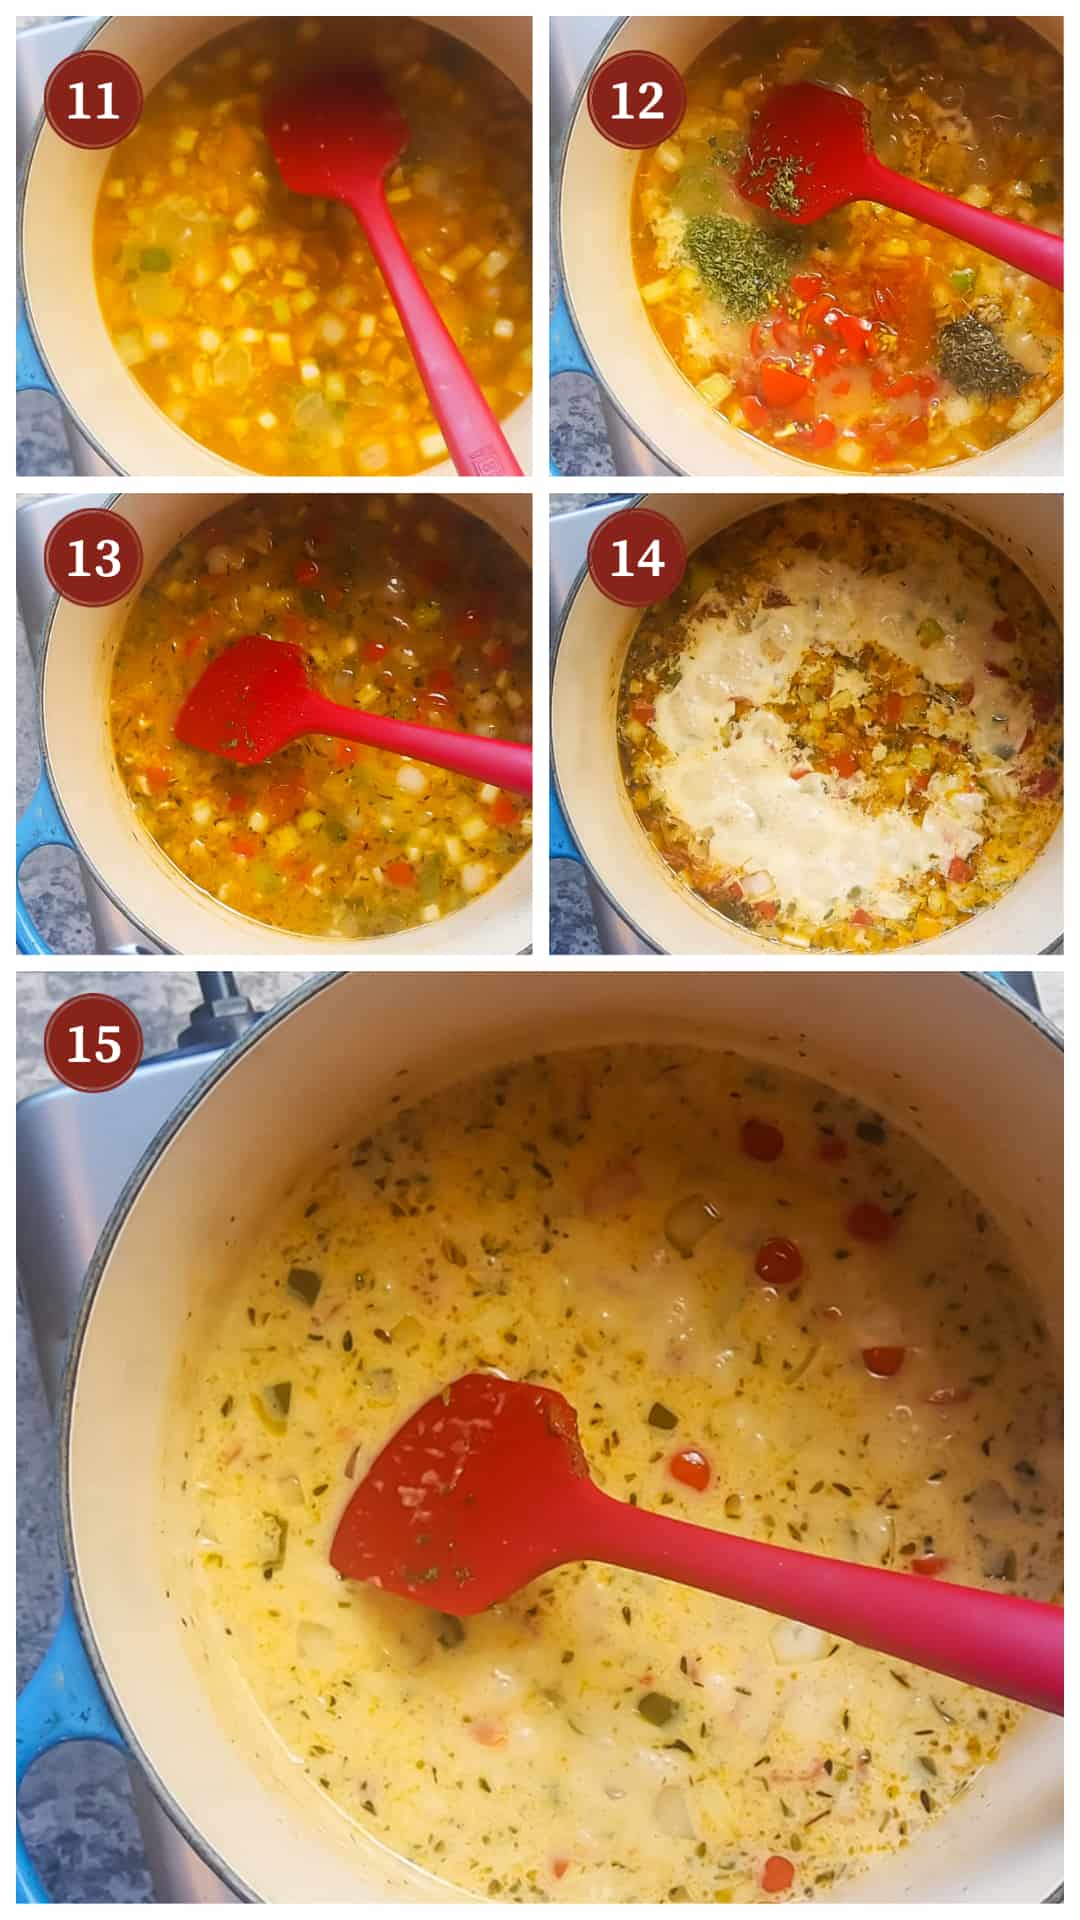 a collage of images showing the process of making crawfish etouffee, steps 11 - 15